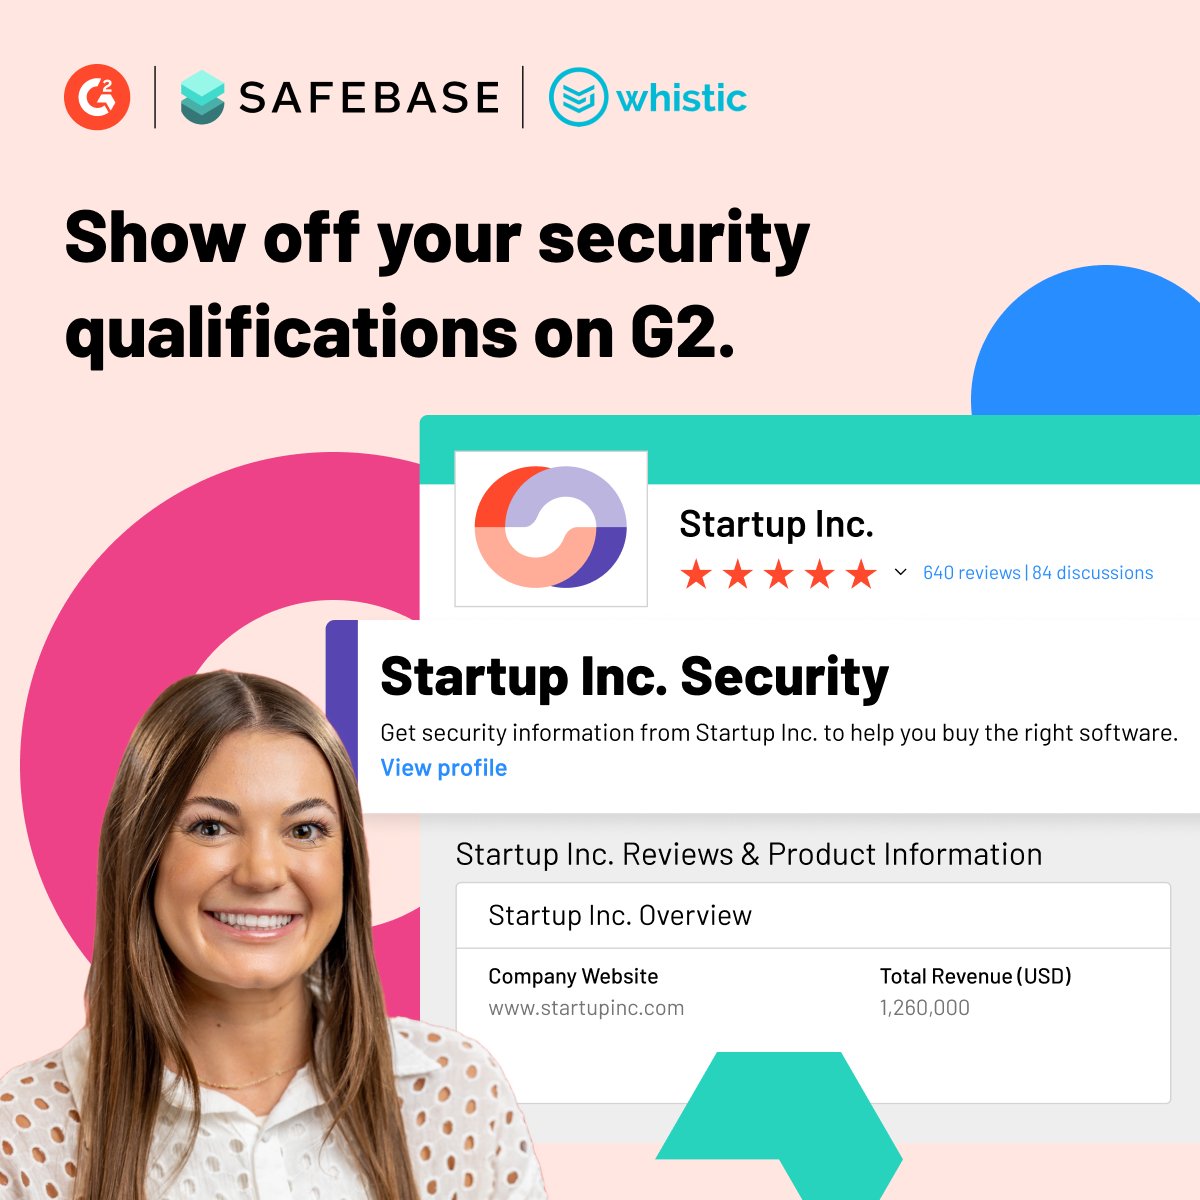 NEW: Stand out from the crowd & give buyers access to security info from @Whistic_Inc or @getsafebase right on your G2 Profile 🔒Highlight security qualifications 🔒Add a competitive edge 🔒Accelerate the security assessment process Learn more: bit.ly/3UnHdzV